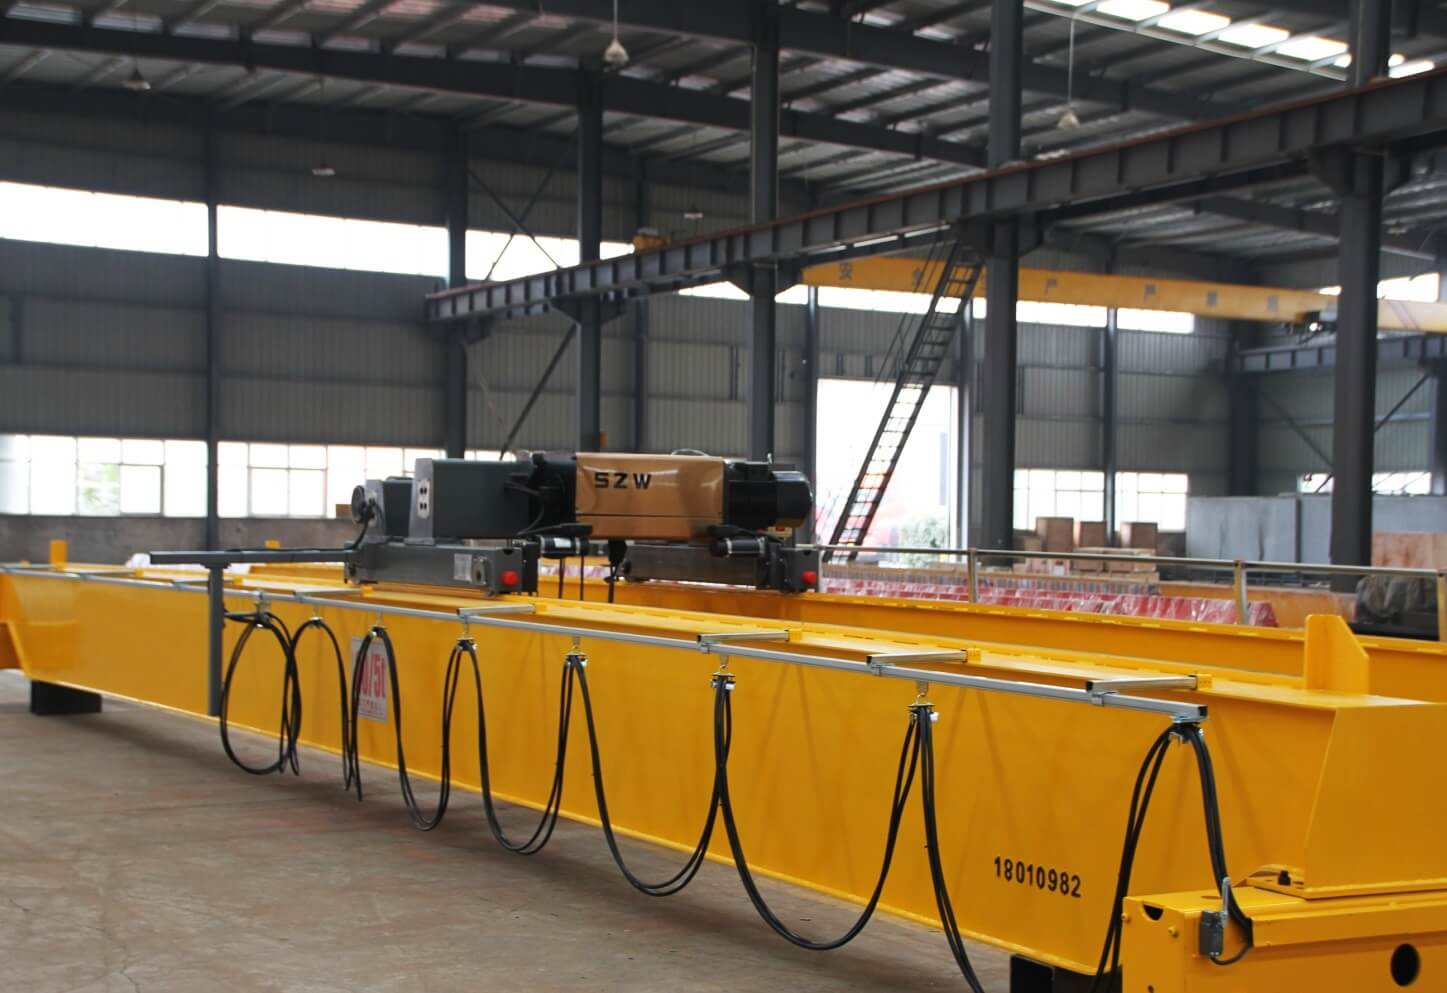 Quote for Europe type 25t double girder overhead crane-24.jpg